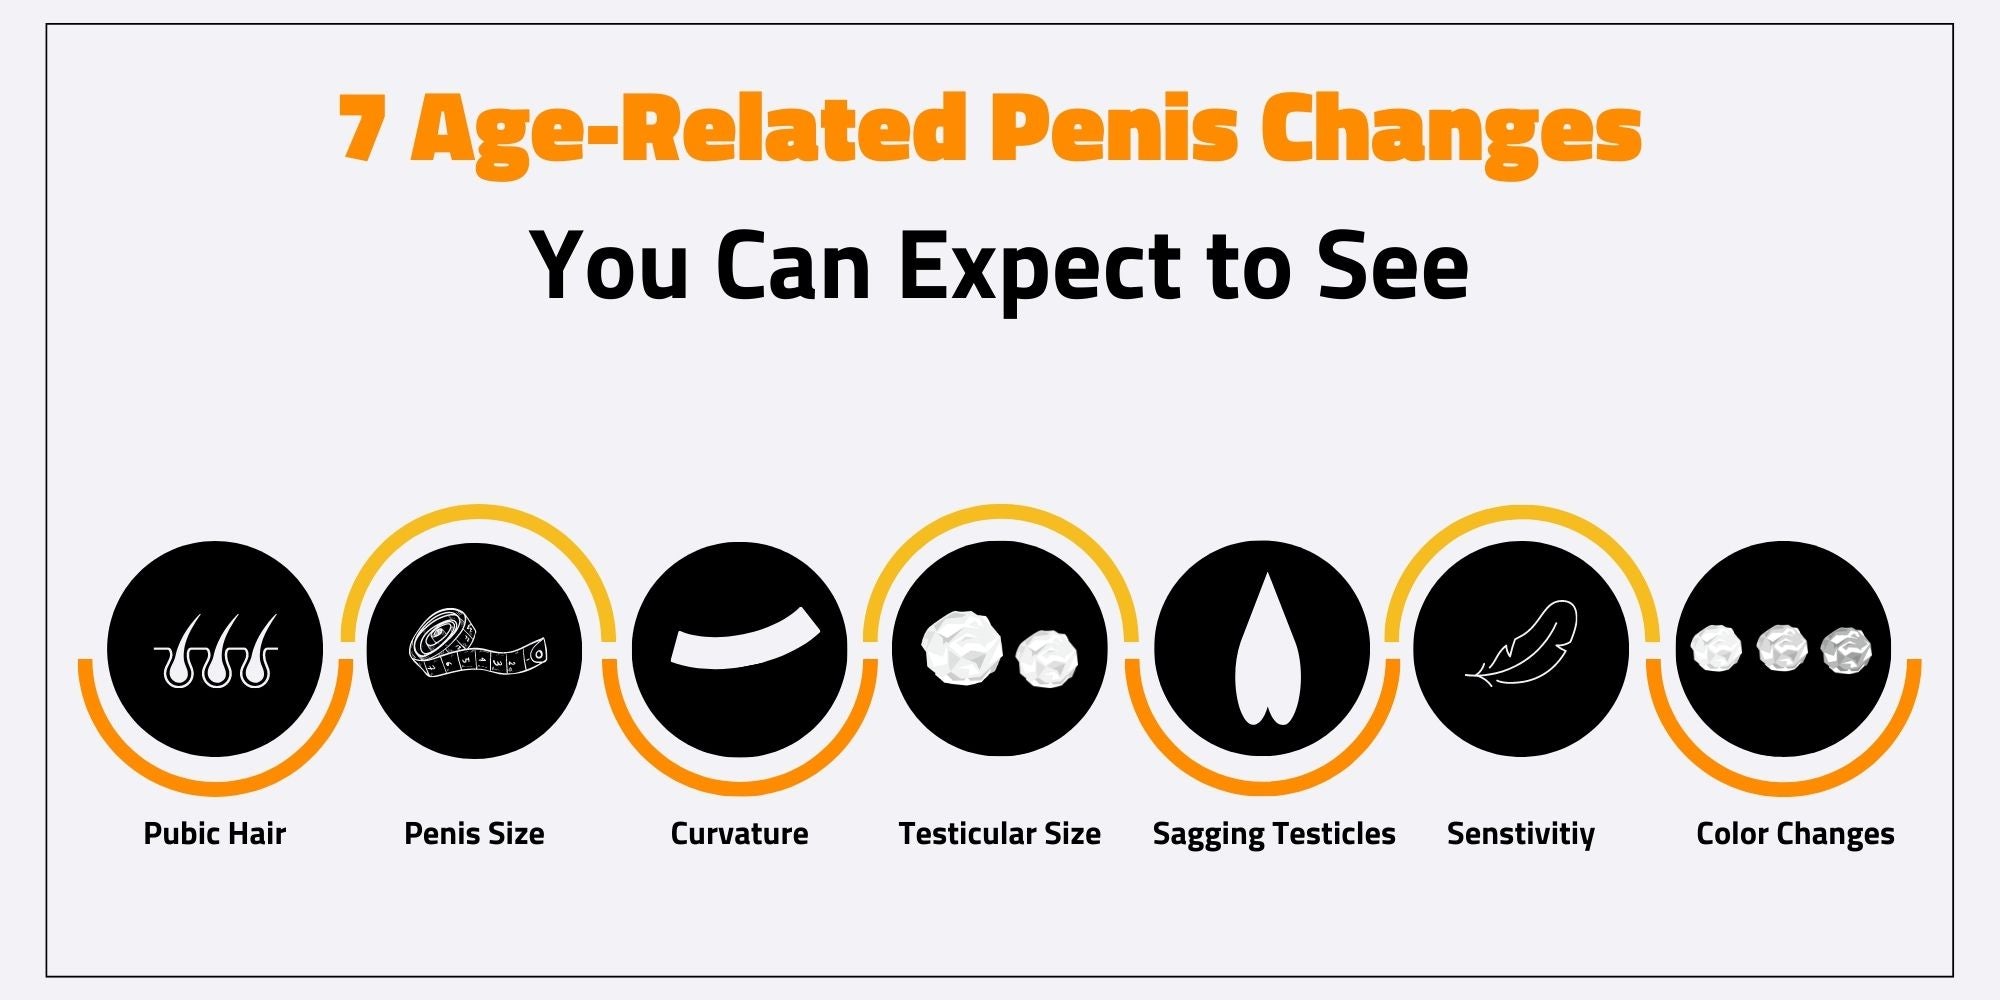 Age-related Penis Sizes Infographic